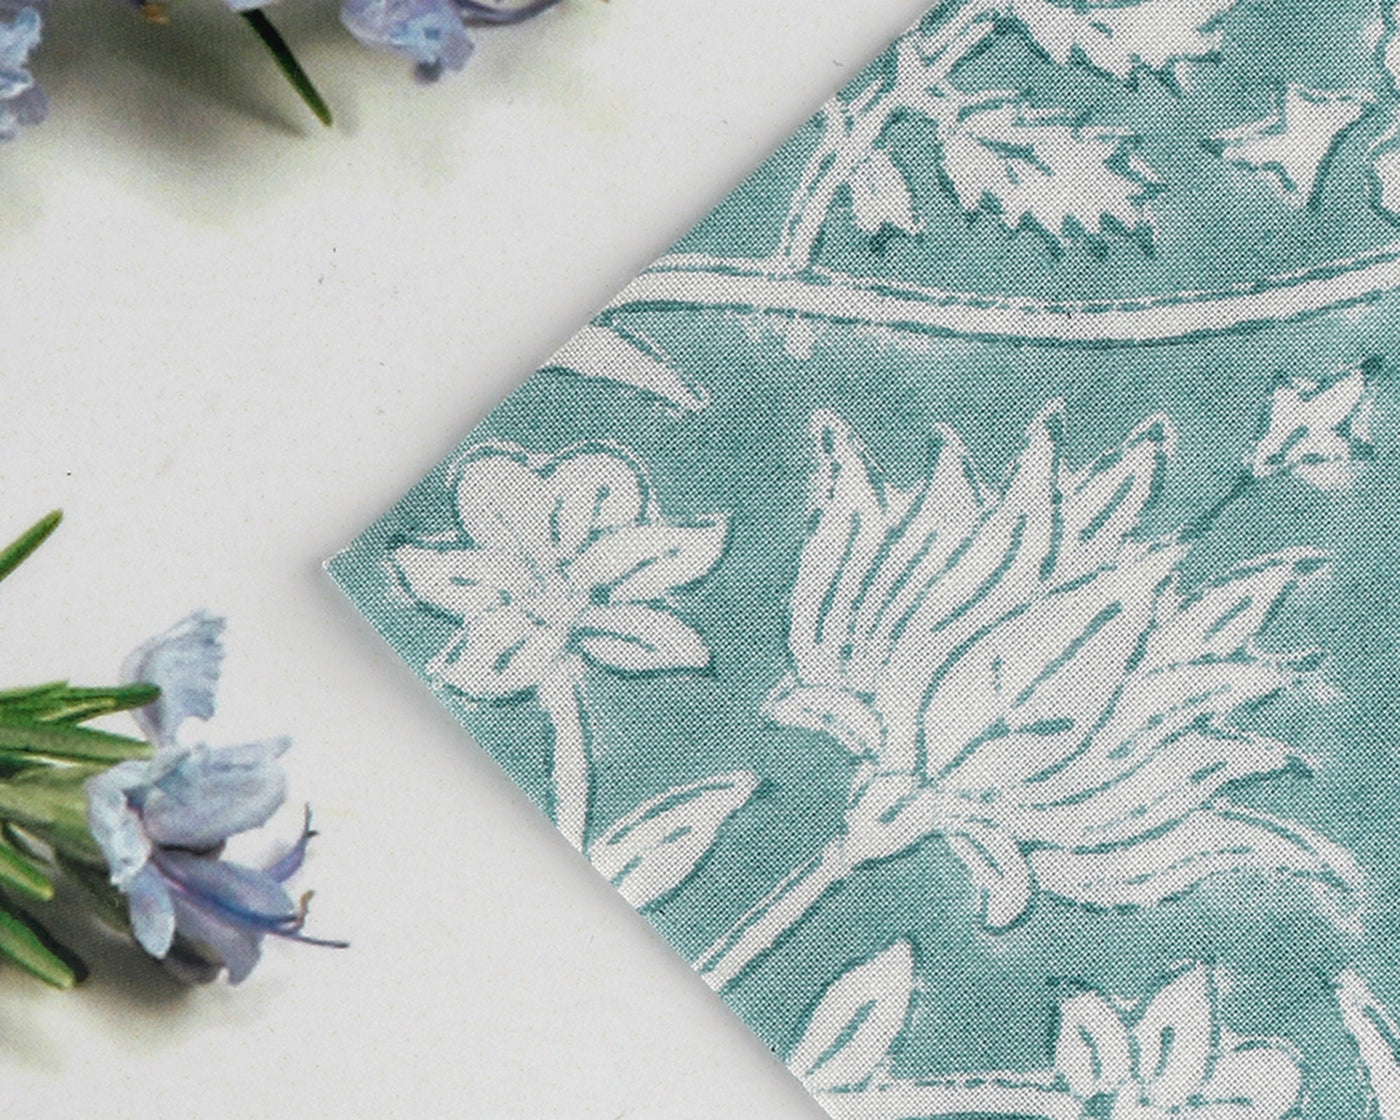 Peppermint Green Indian Floral Hand Block Printed Cotton Cloth Napkins Size  20x20 Set of 4,6,12,24,48 Wedding Party Home Decor Restaurant 